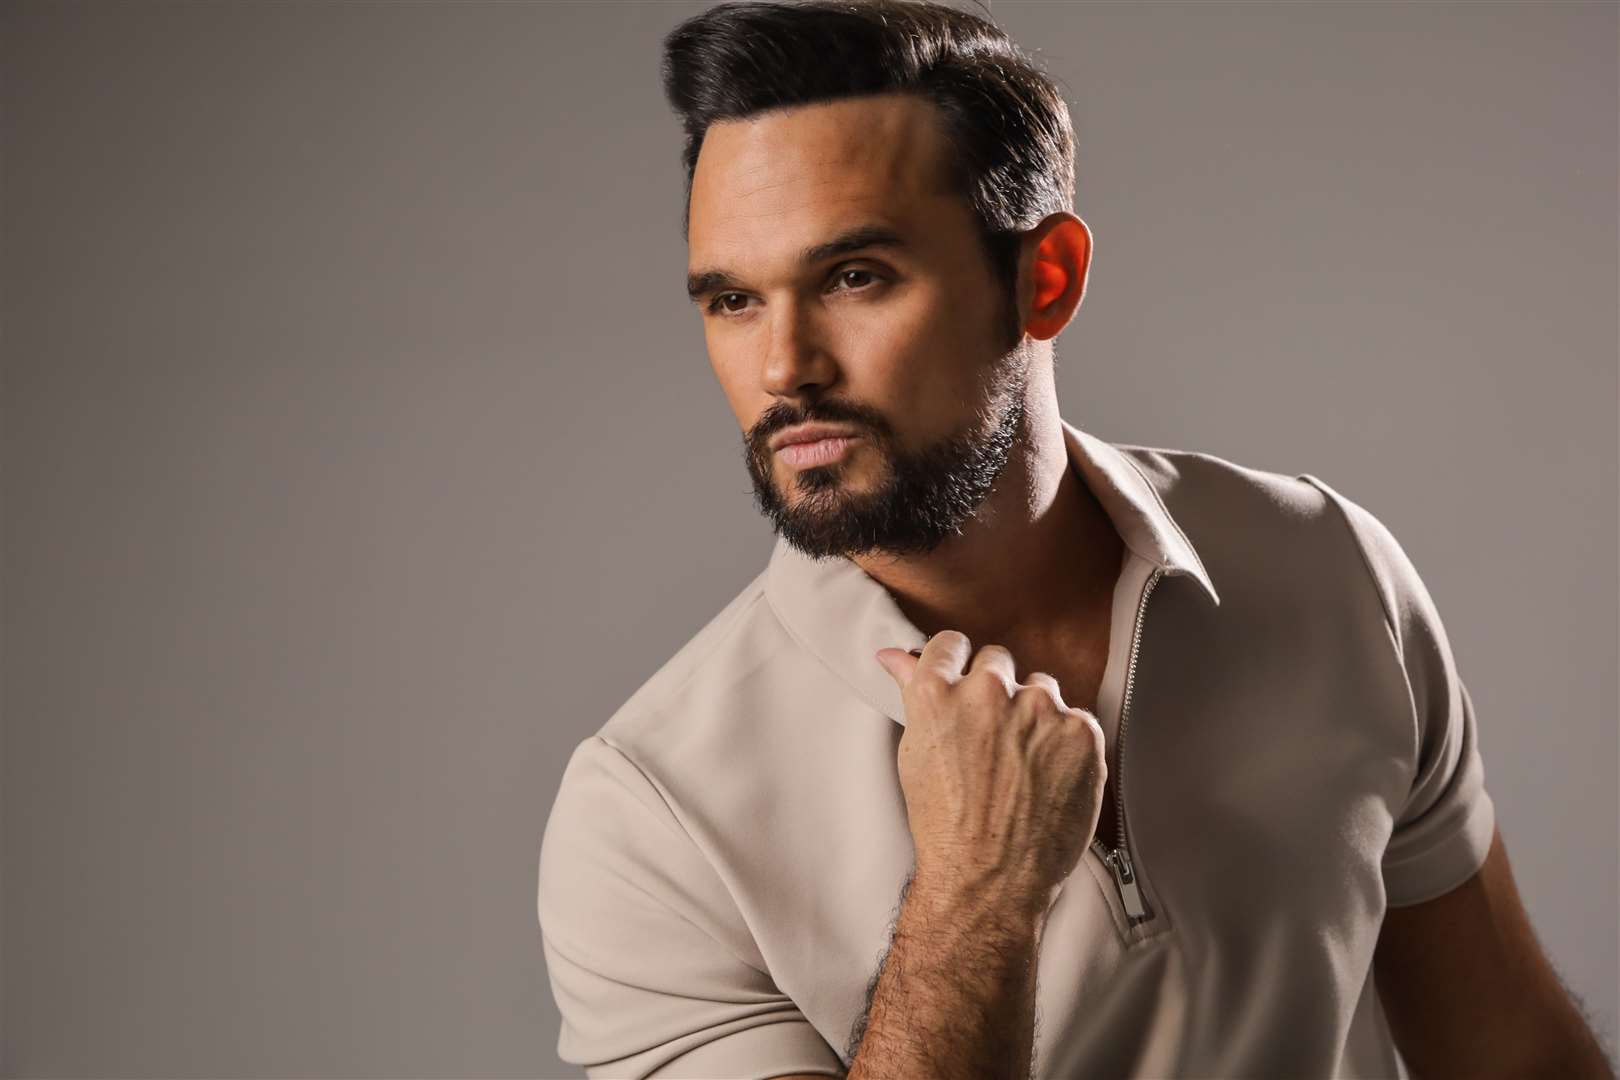 Gareth Gates will be starring in the Best of Frankie Valli and the Four Seasons